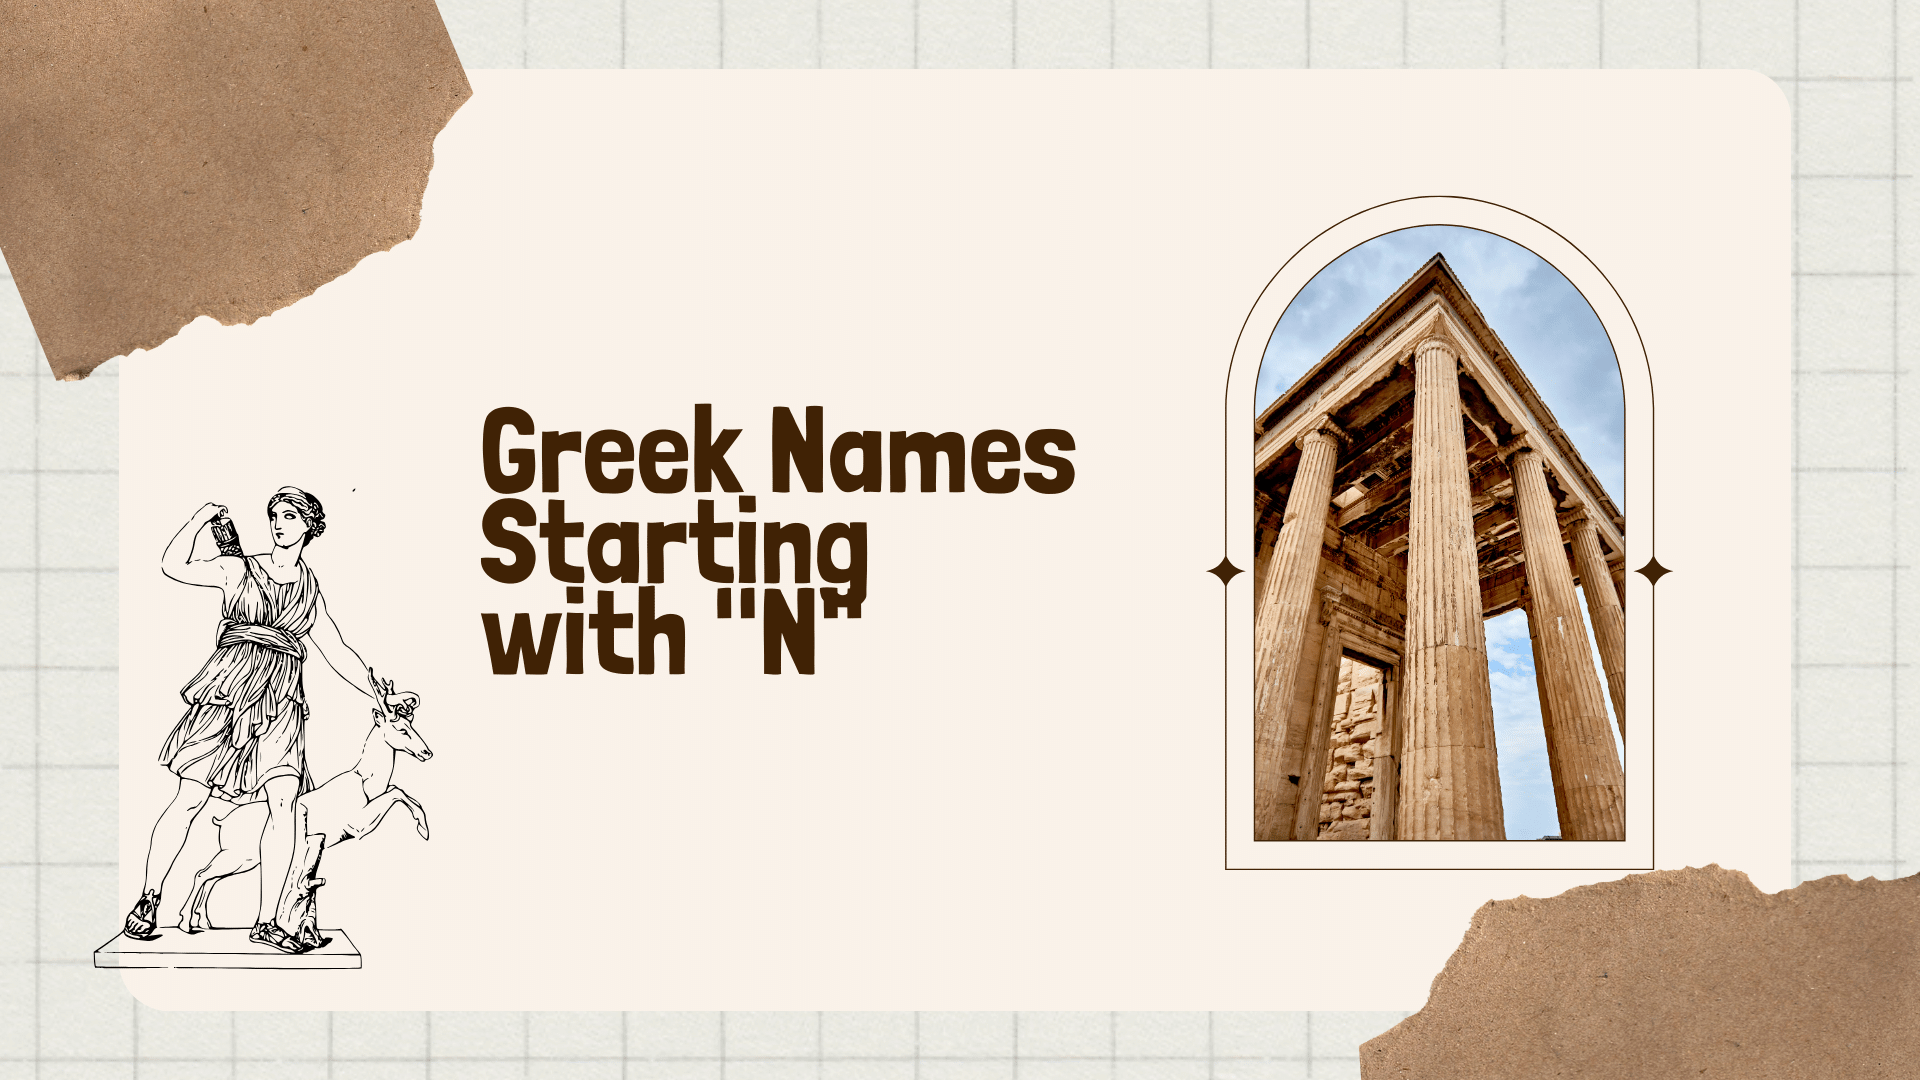 Greek Letters Starting With "N"